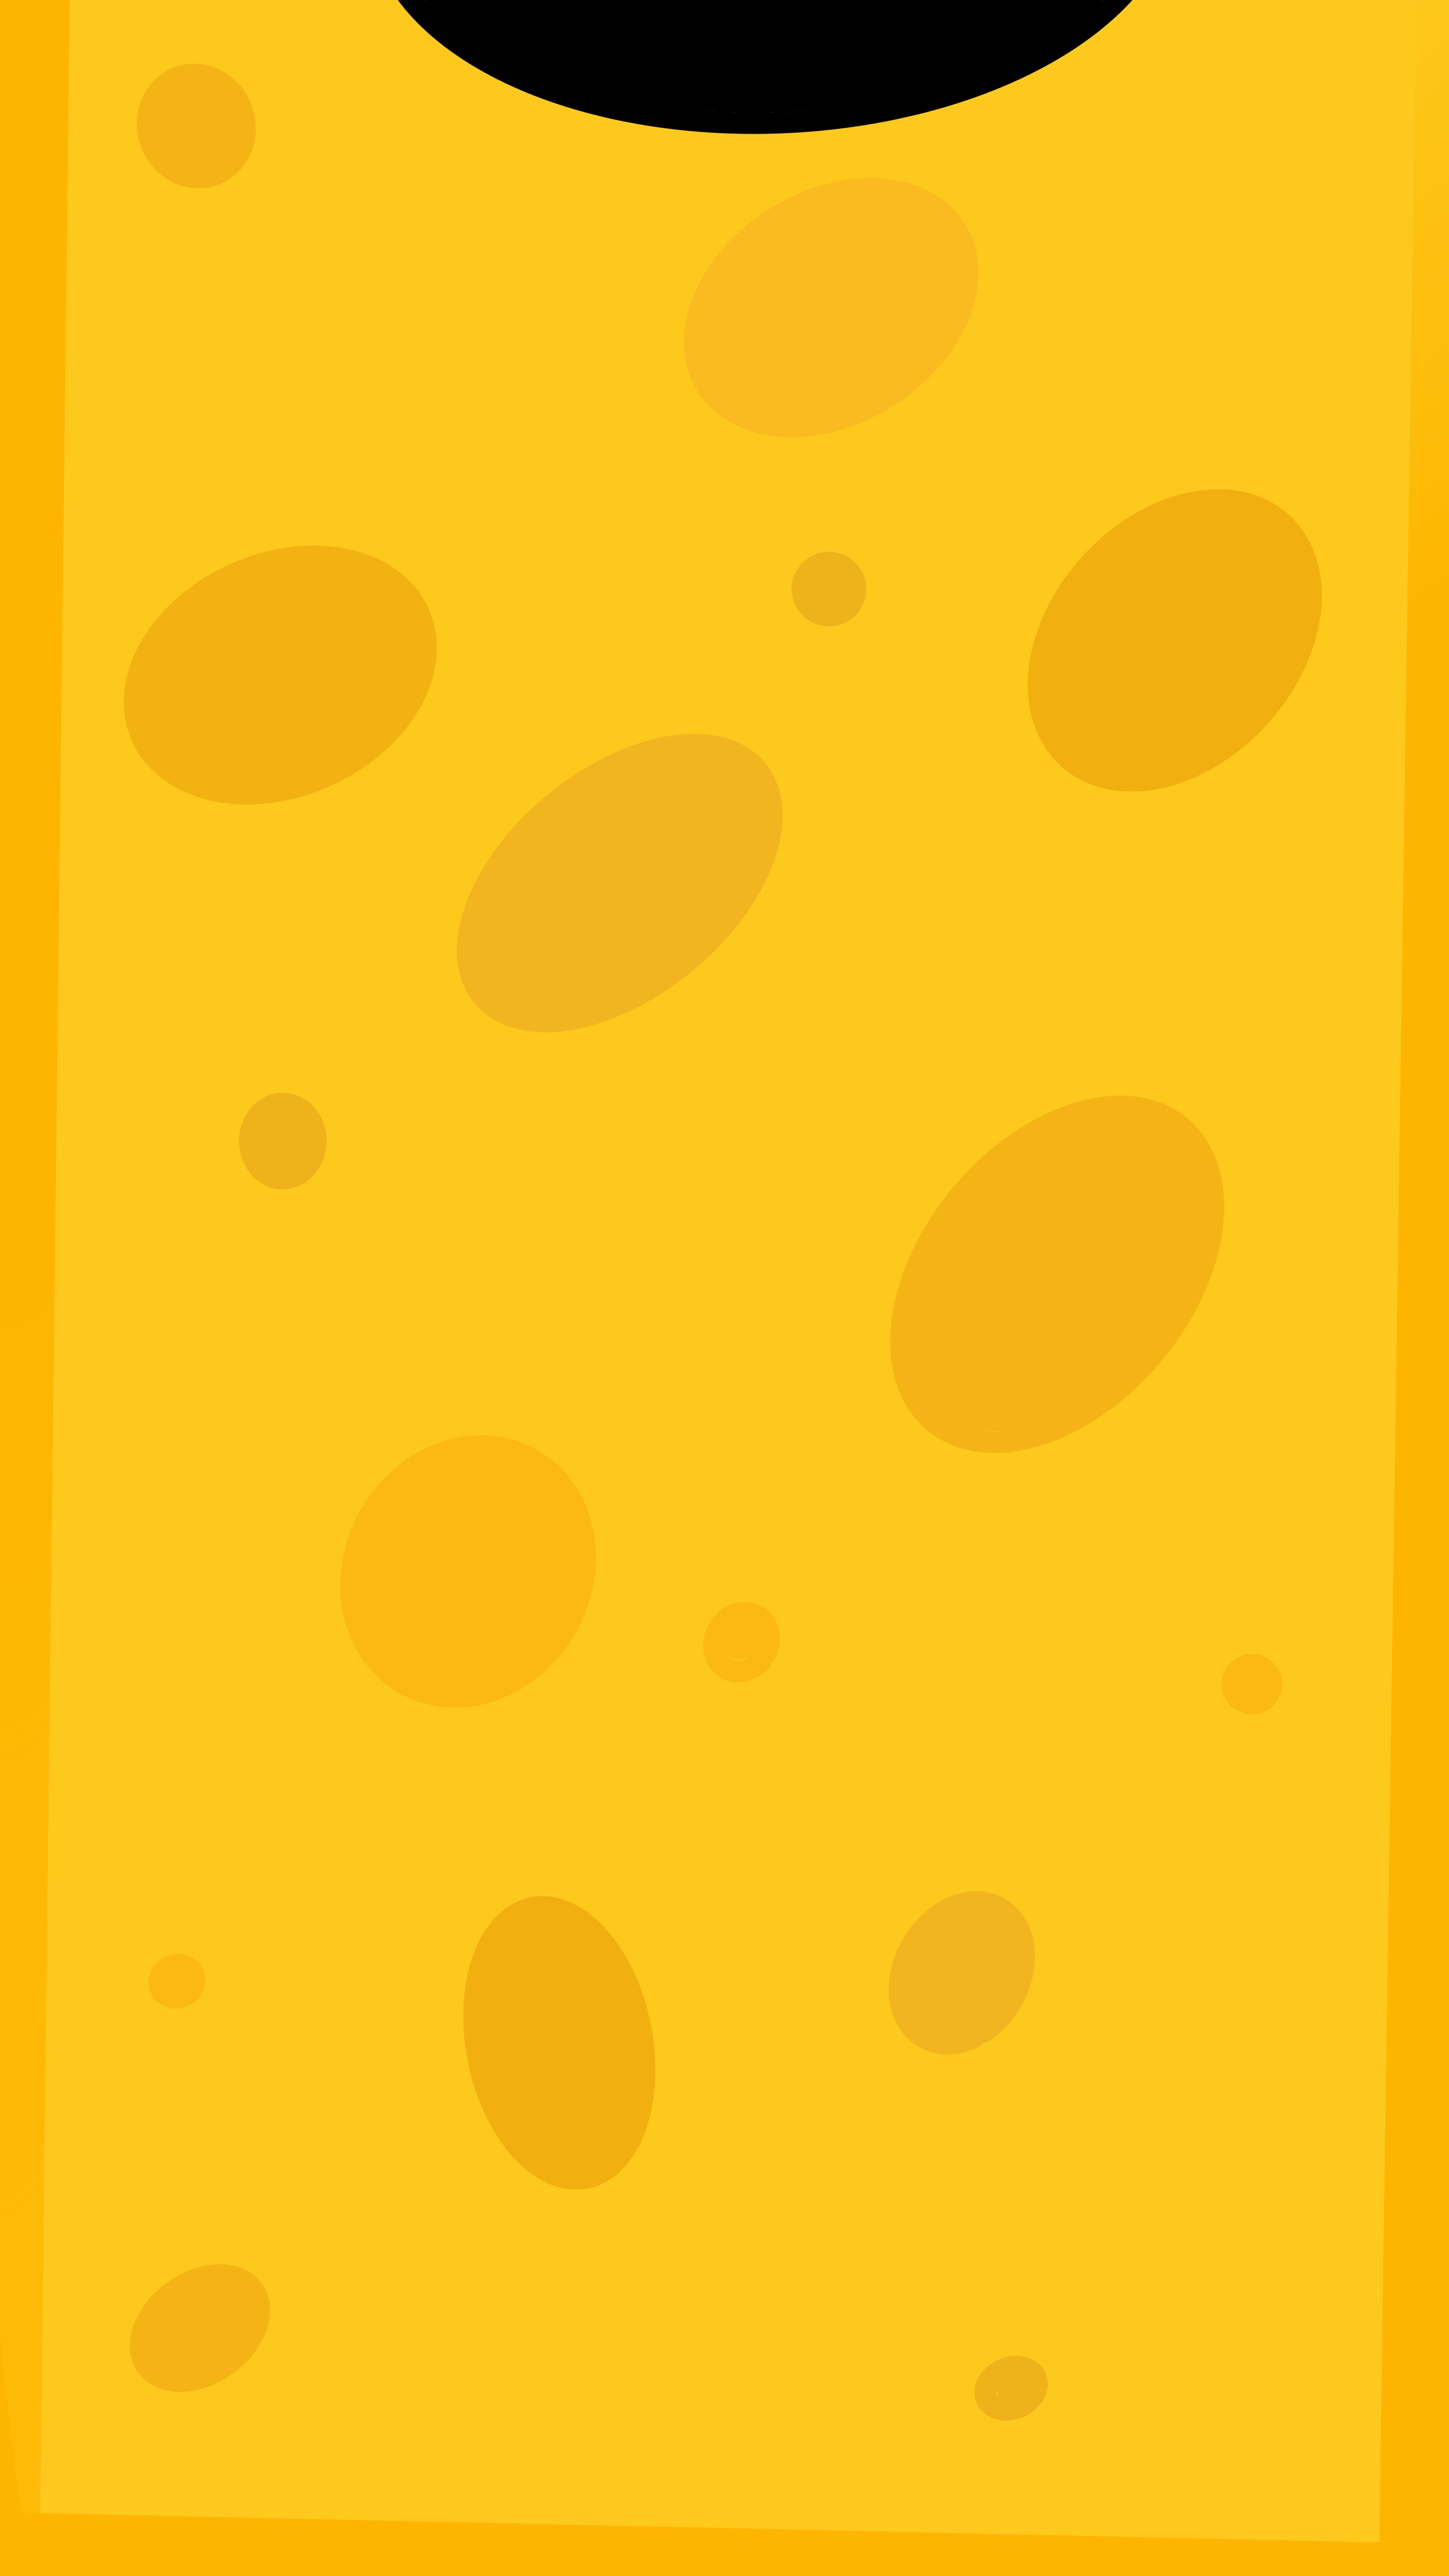 83059 Screensavers and Wallpapers Cheese for phone. Download textures, cheese, yellow, texture pictures for free